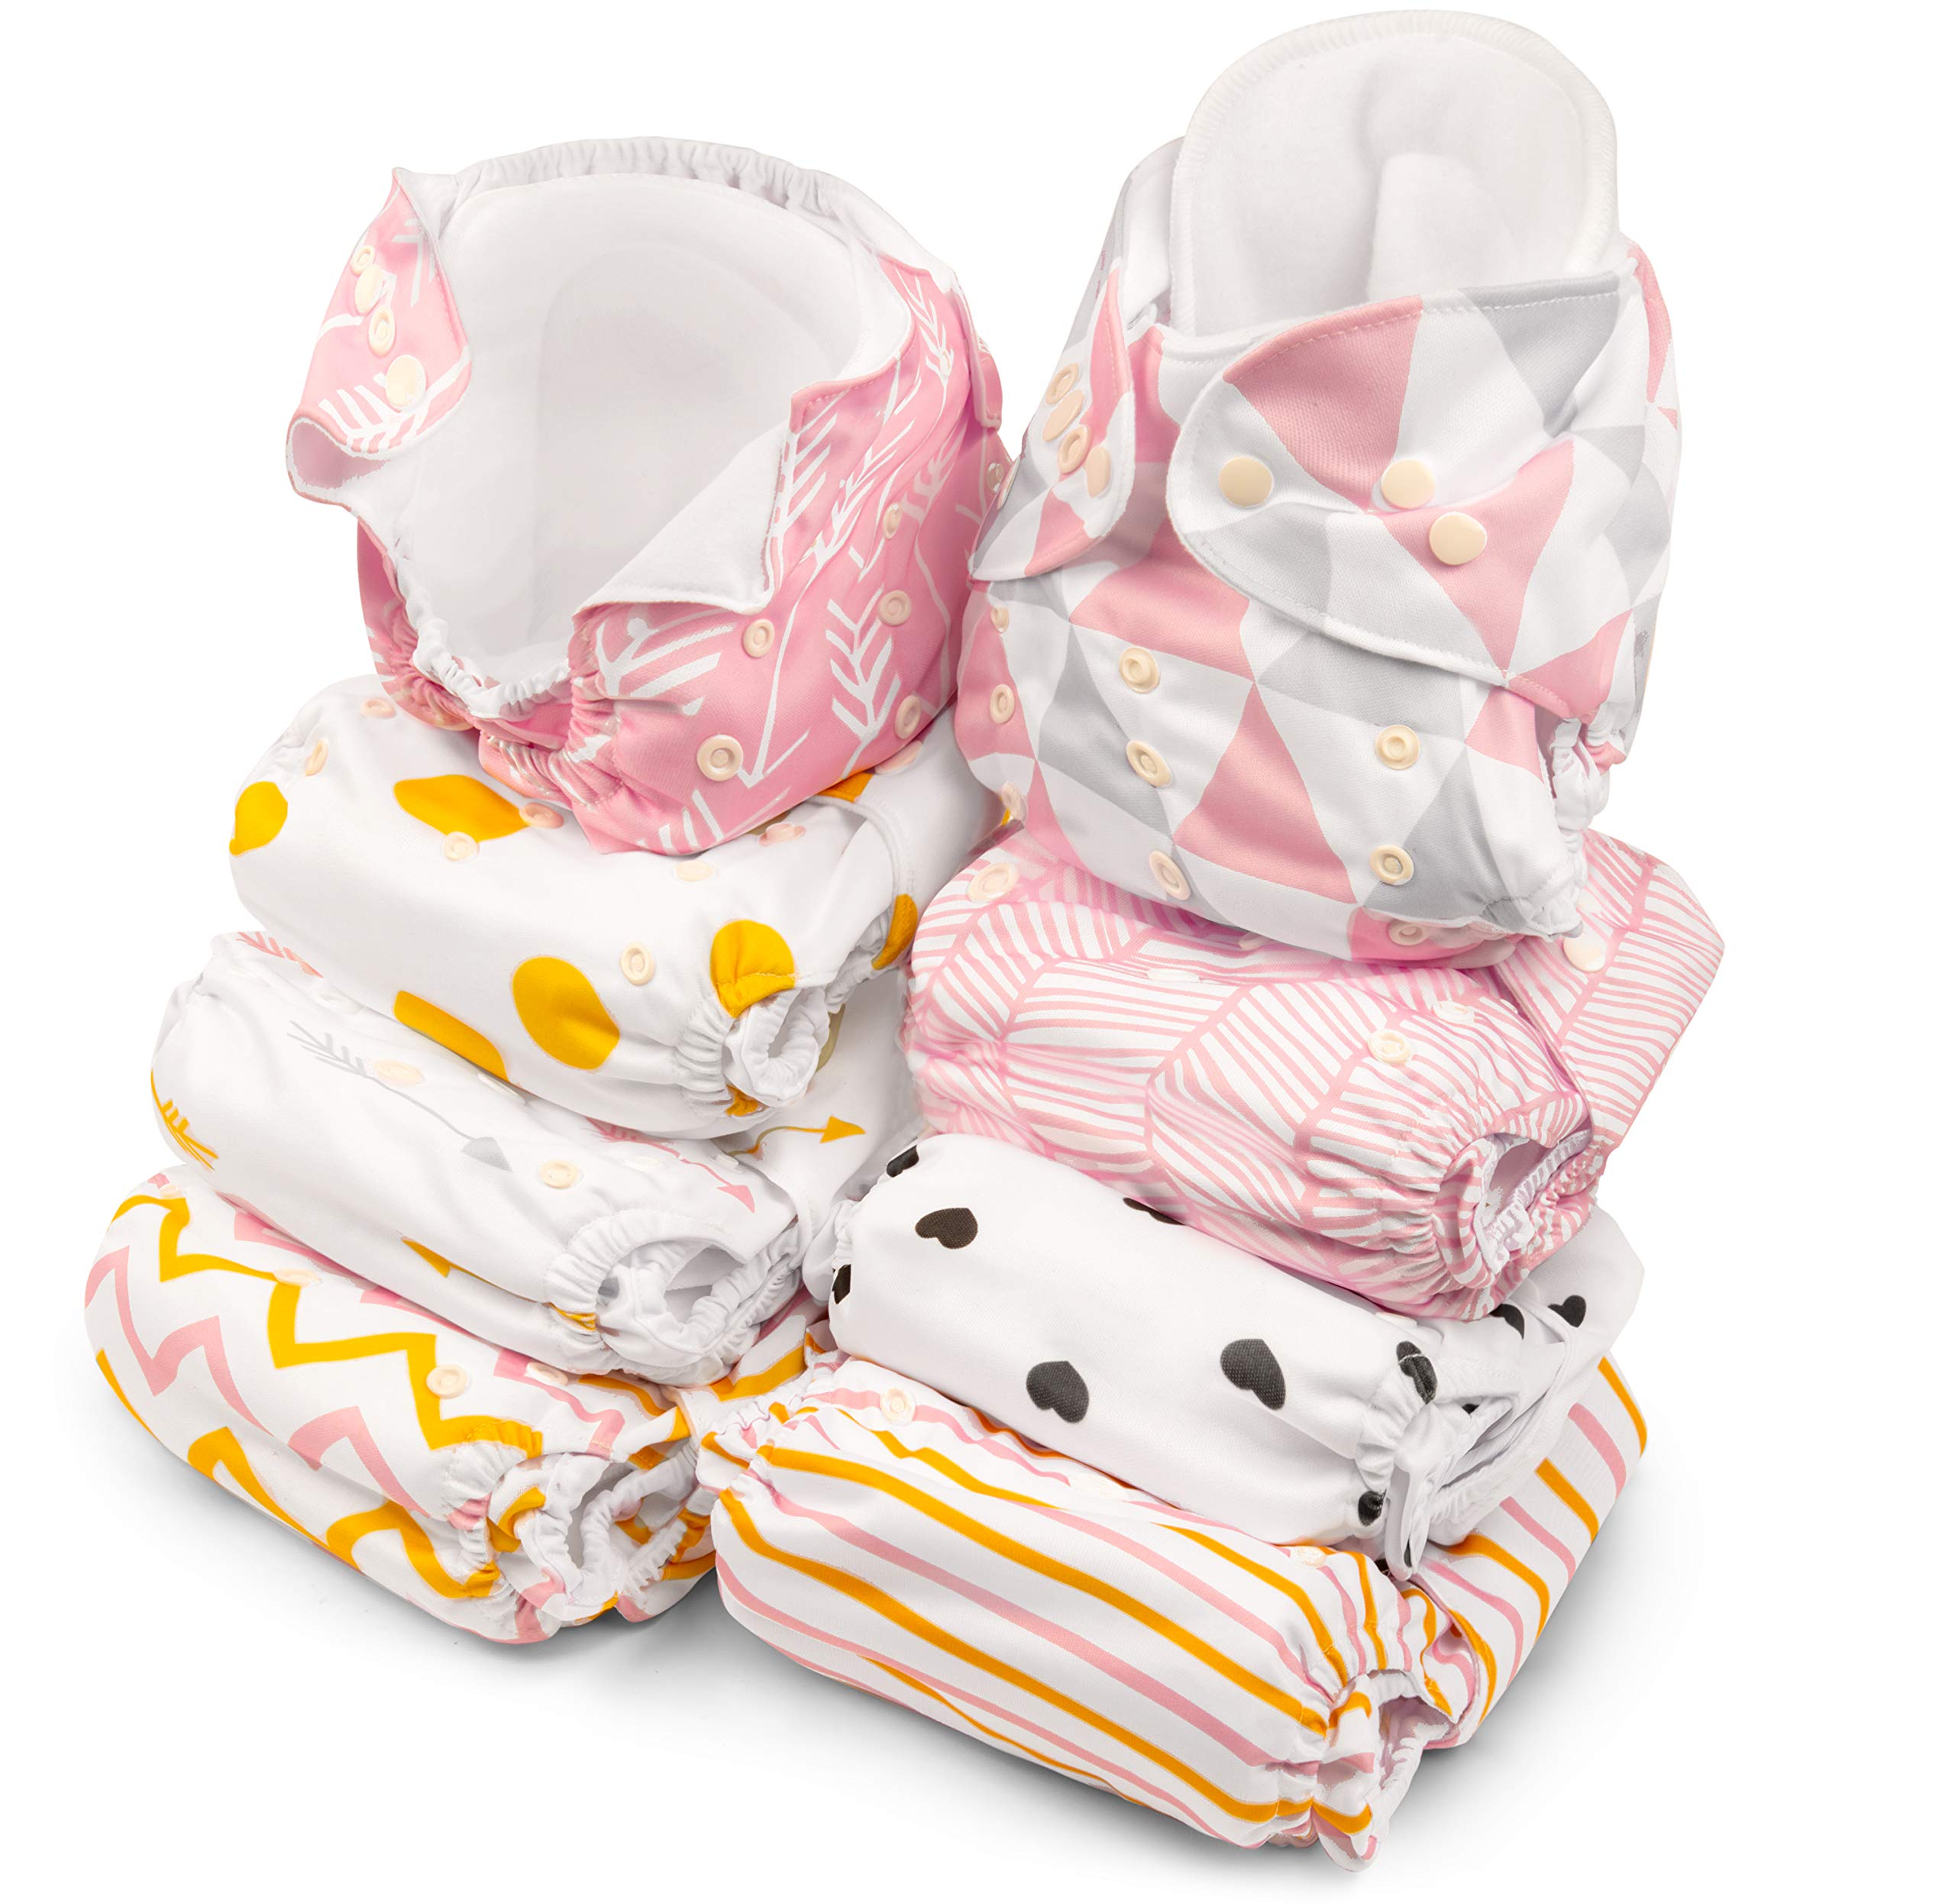 BaeBae Goods Adjustable Cloth Diapers for Boys and Girls – 8 Reusable Cloth Diapers for Babies with 8 Cloth Diaper Inserts (Pink Triangles)